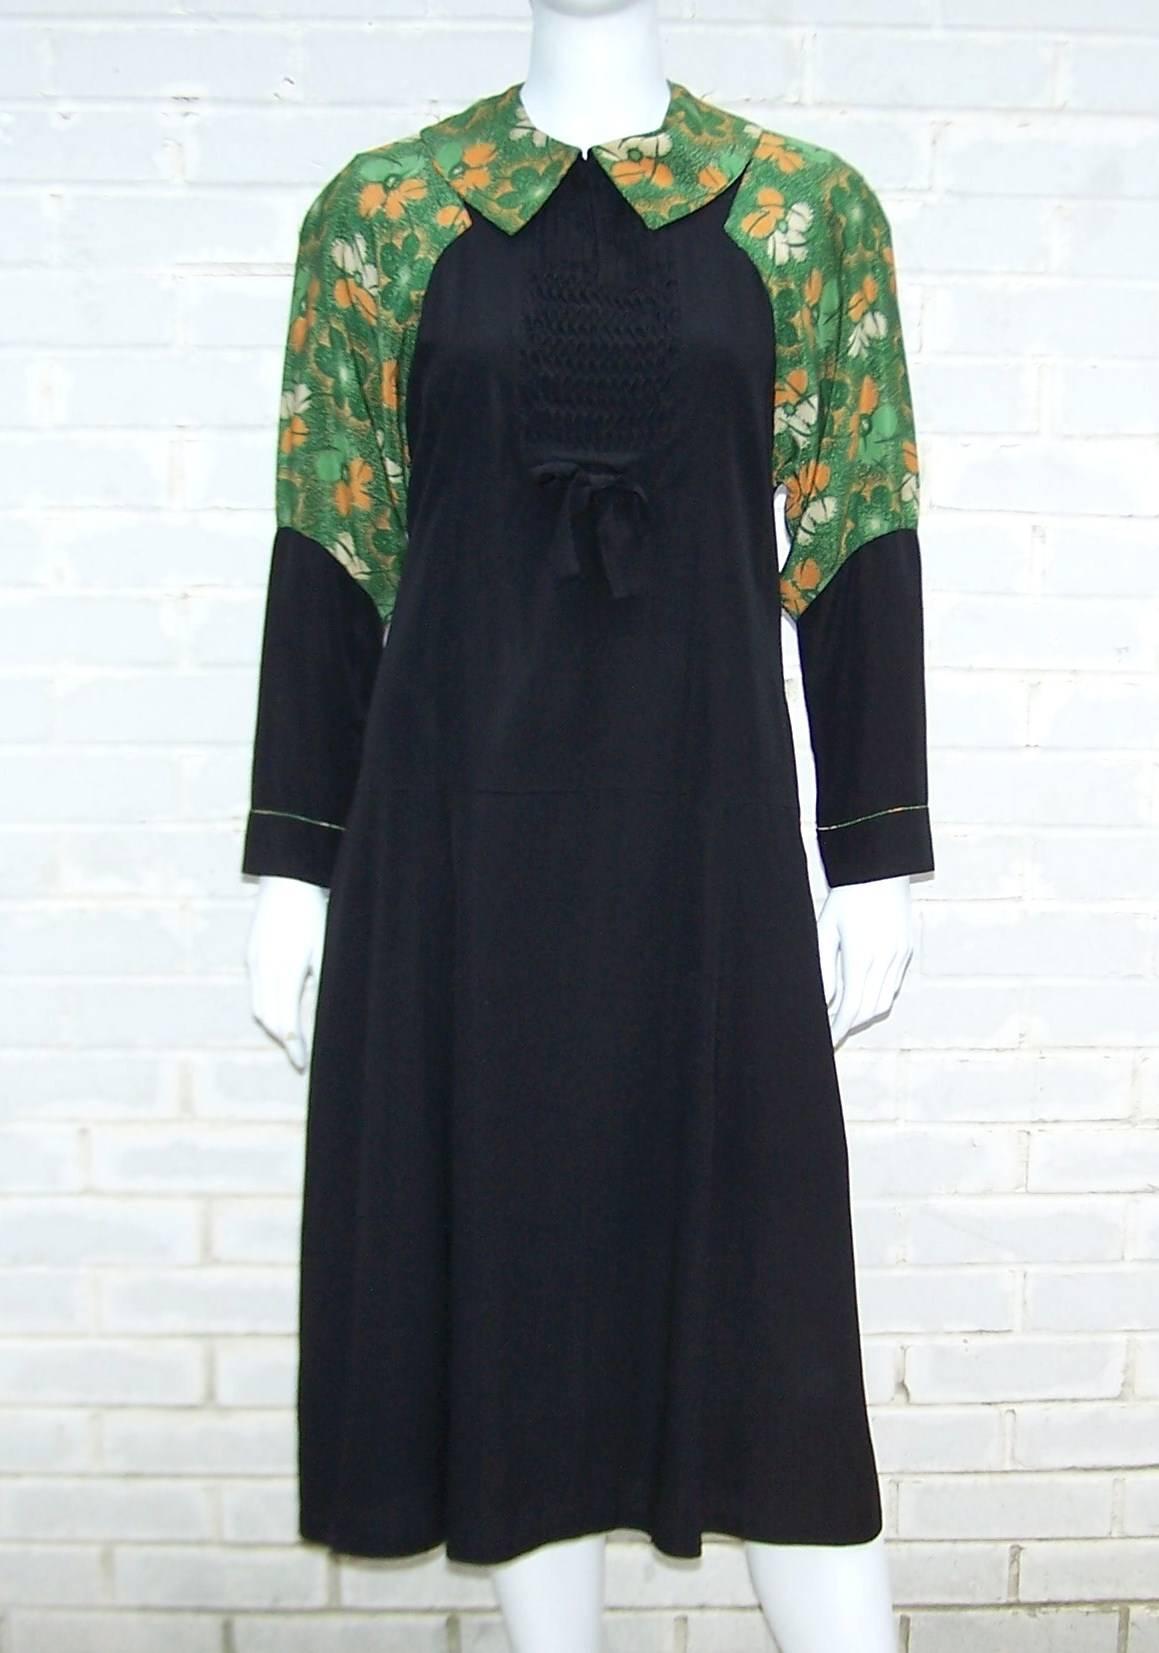 The unique design on this 1920's dress creates a faux visual of an apron or pinafore style dress.  The black rayon contrasts nicely with the bright green abstract floral pattern and the intricate pin tucking and bow provide visual interest.  The